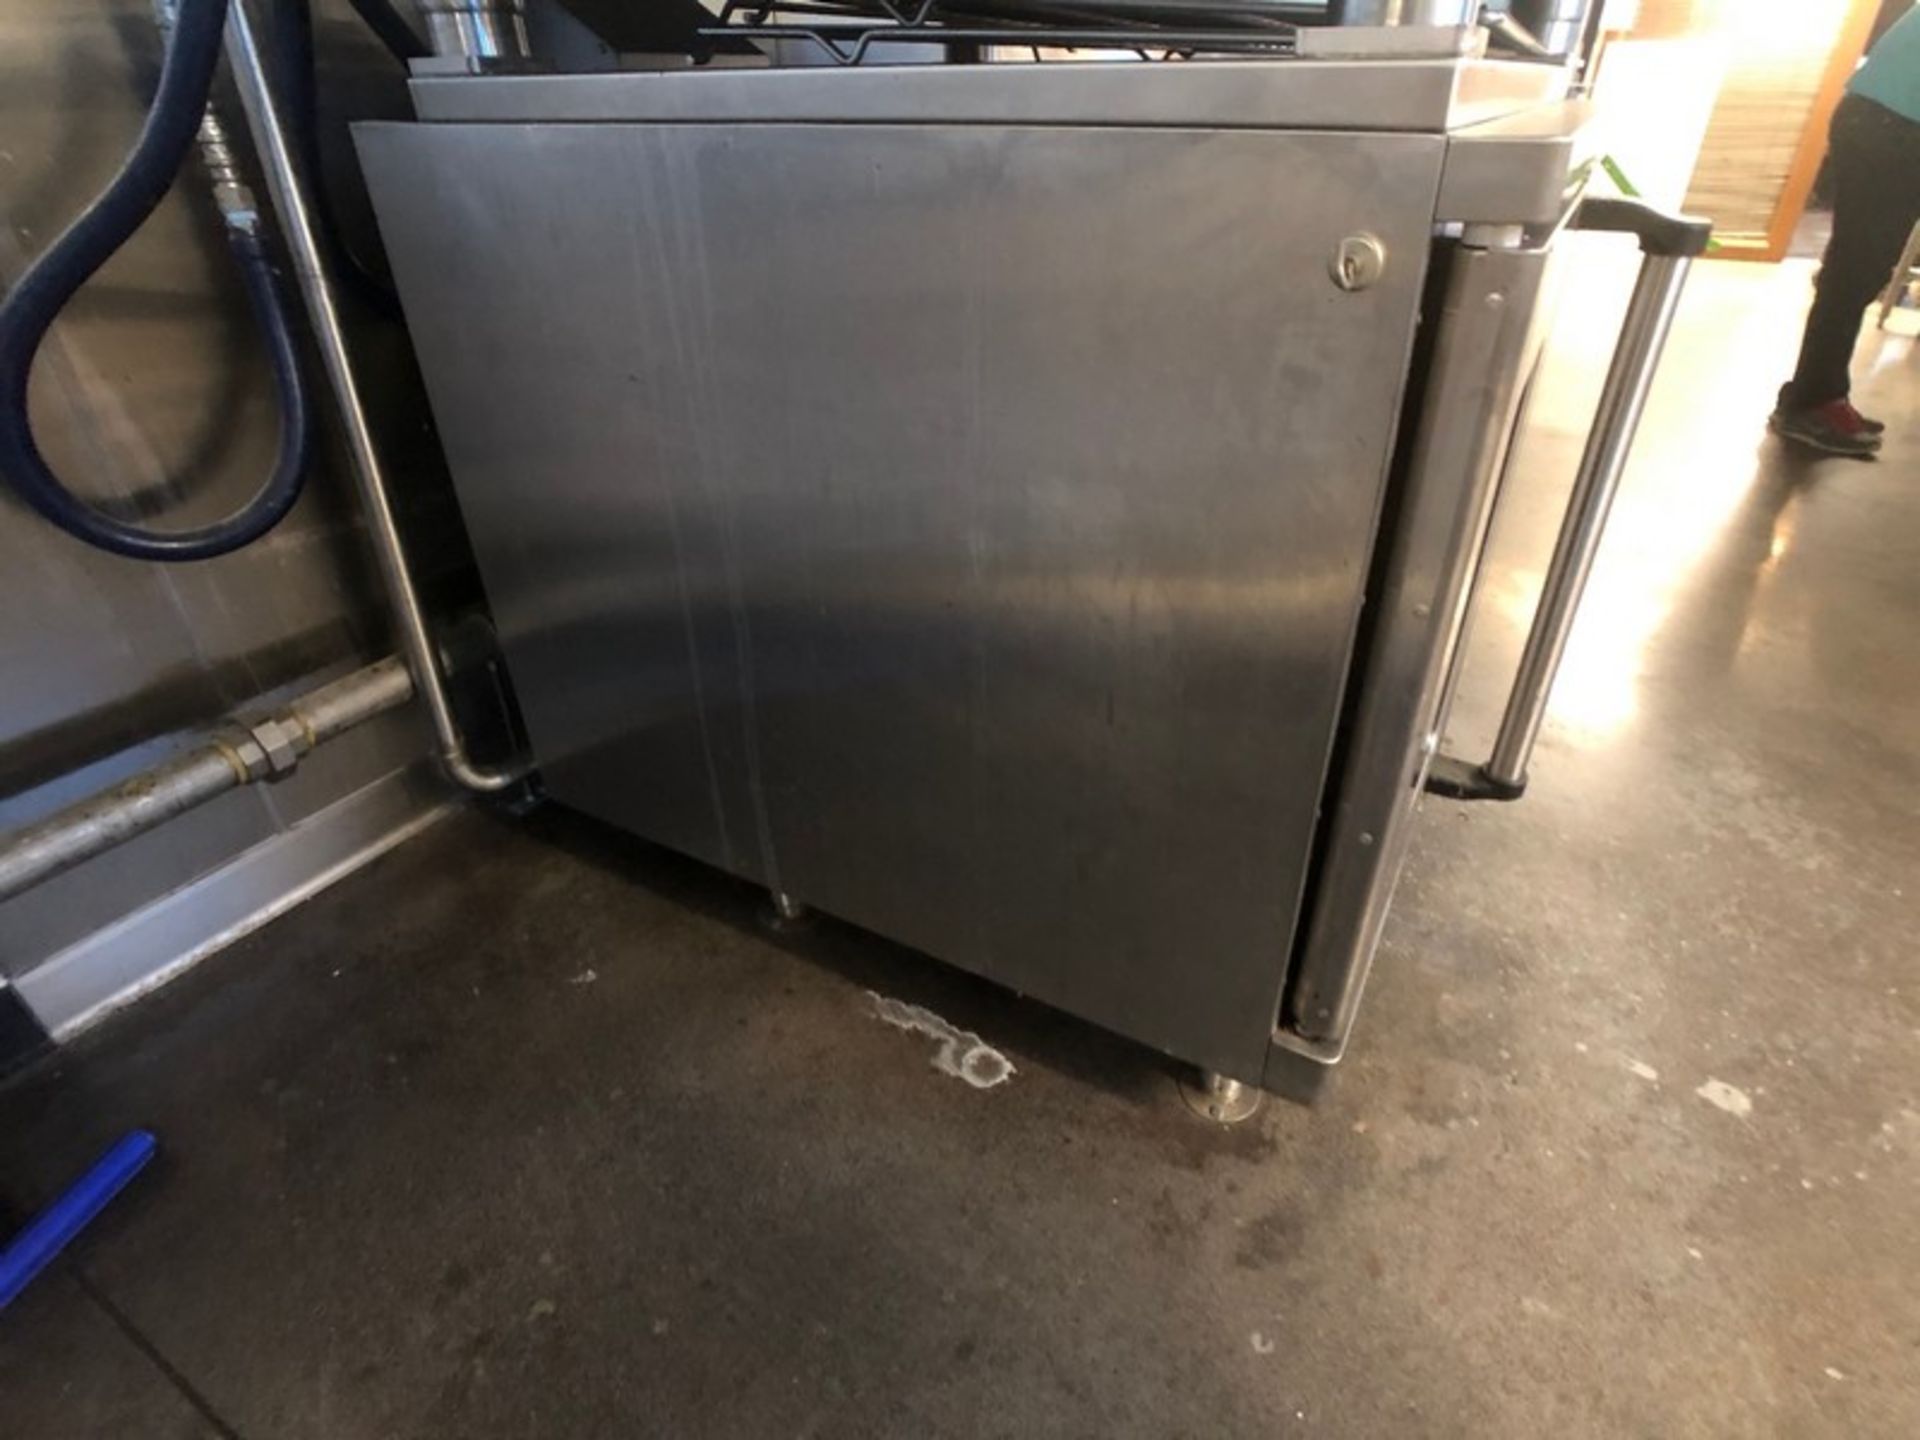 2016 ALTO-SHAM CONVECTION OVEN, MODEL ASC-4G, S/N1745394-000 (INV#74526)(Located @ the MDG Auction - Image 3 of 5